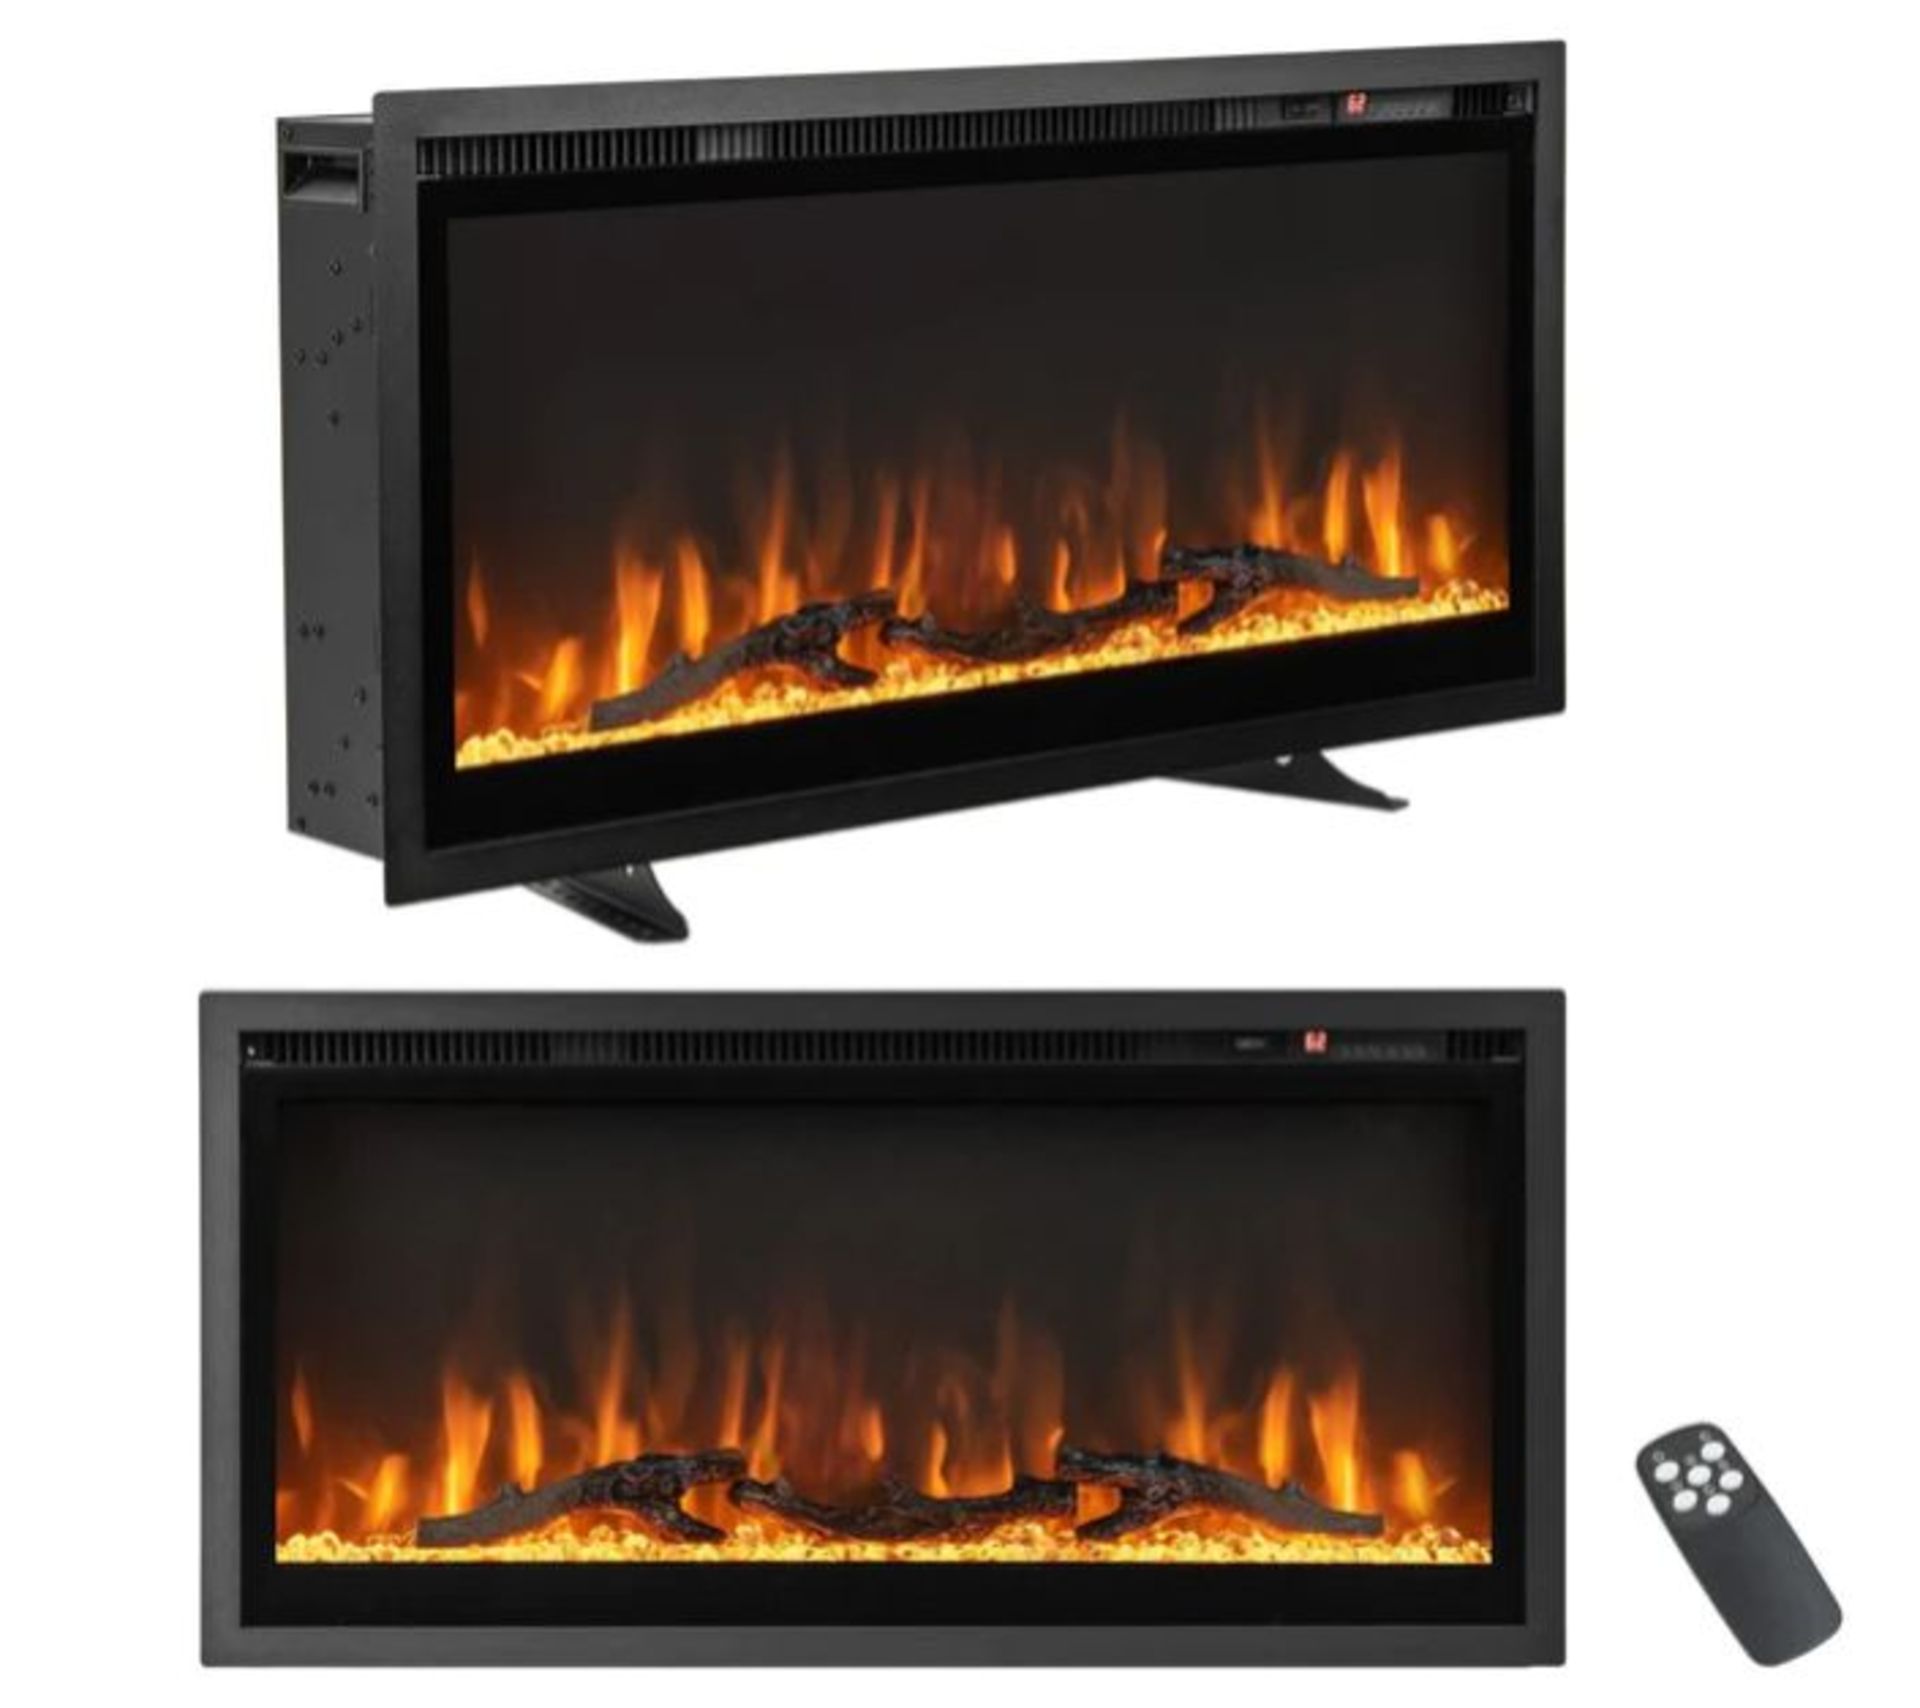 36"/91CM LINEAR ELECTRIC FIREPLACE WITH LOG AND CRYSTAL DECOR AND REMOTE CONTRO-91 CM. - ER25.